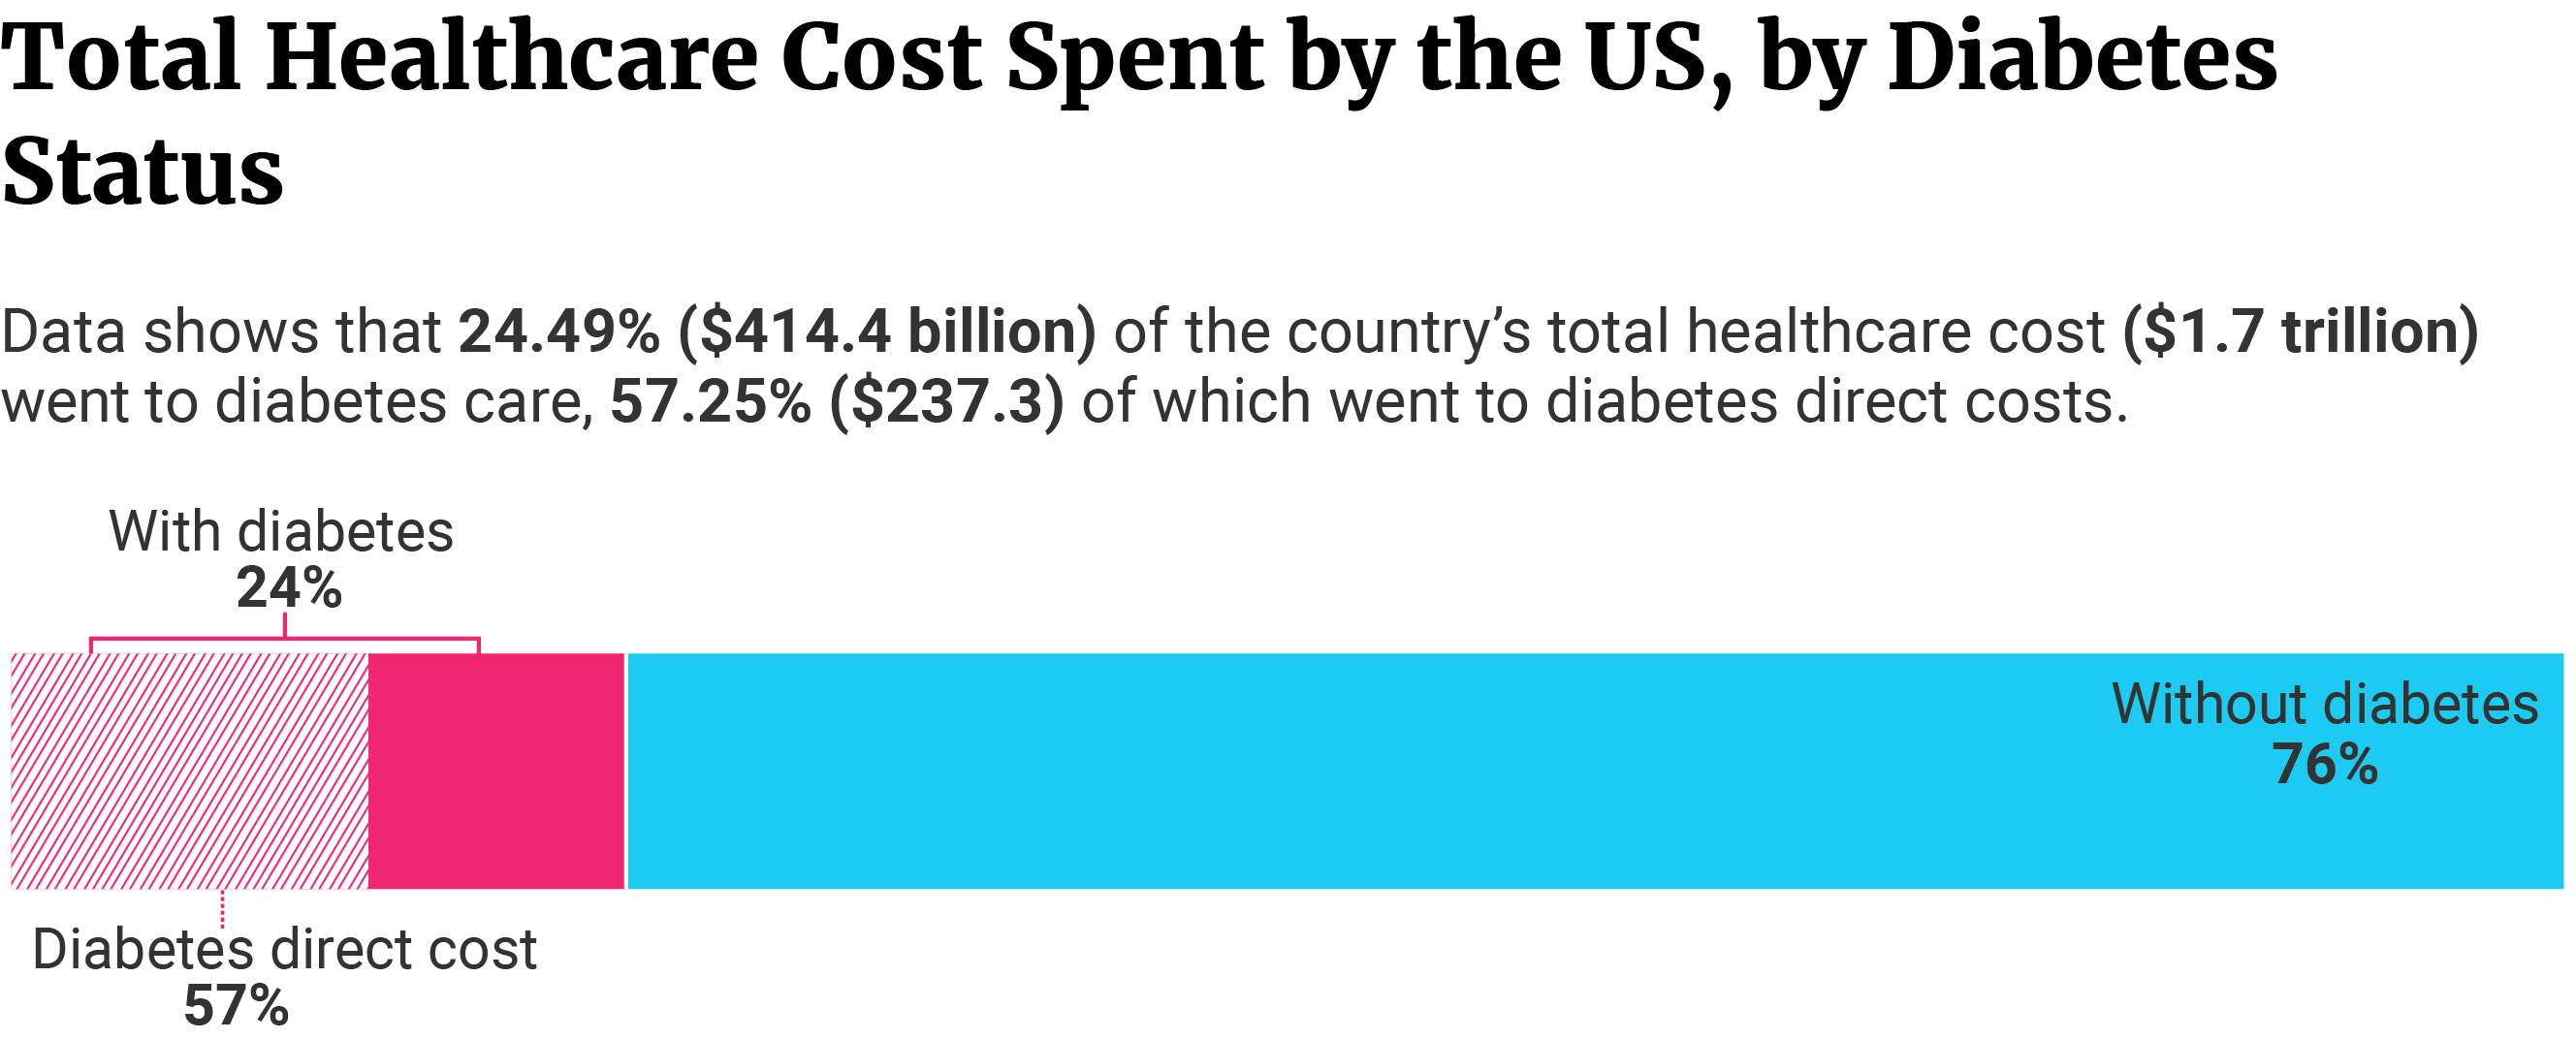 Stacked bar showing 24.49% of the total healthcare cost spent by the US went to diabetes care.